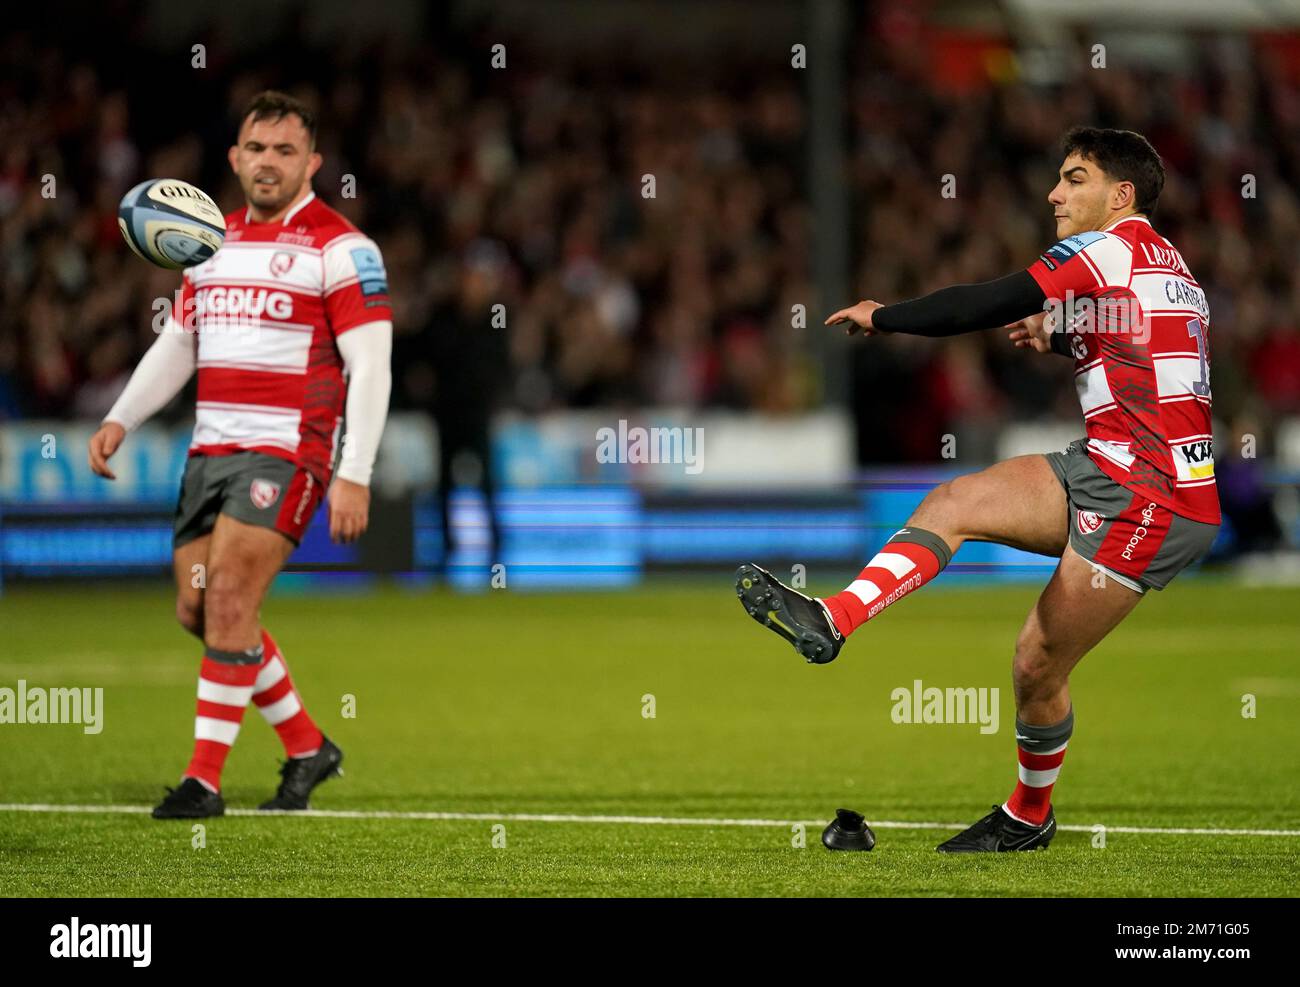 Gloucester Rugbys Santiago Carreras converts a penalty during the Gallagher Premiership match at Kingsholm Stadium, Gloucester